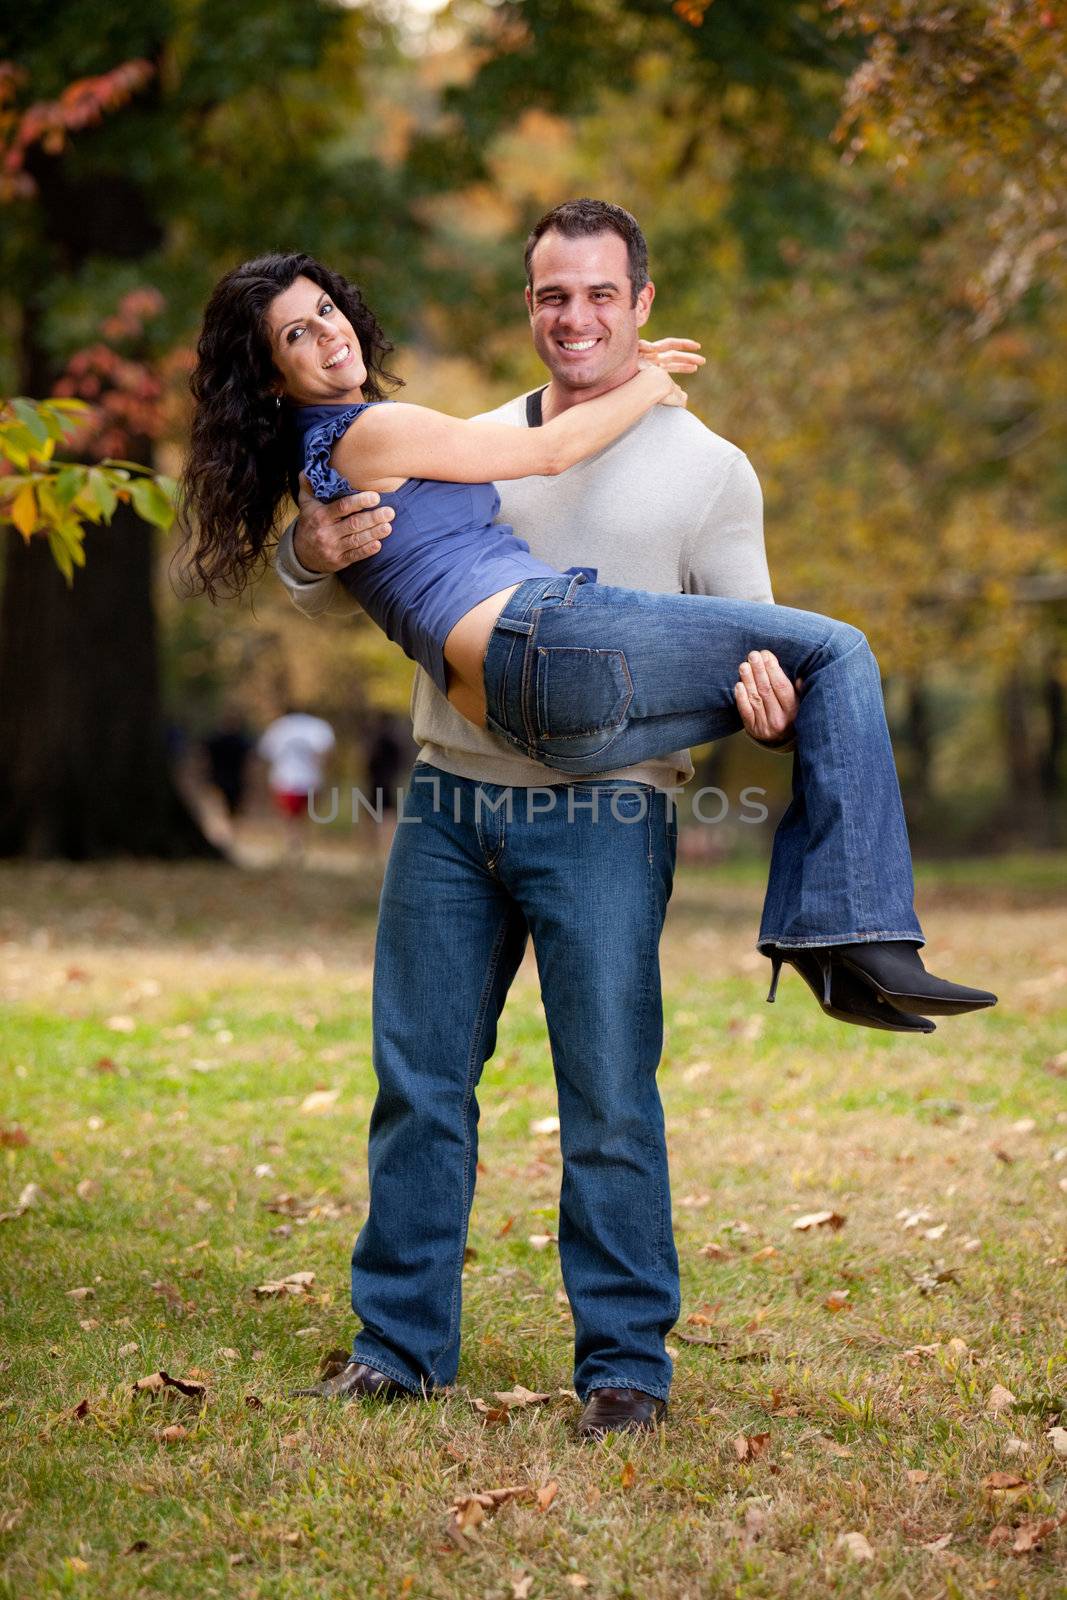 A happy healthy couple in the park - Man holding the Woman